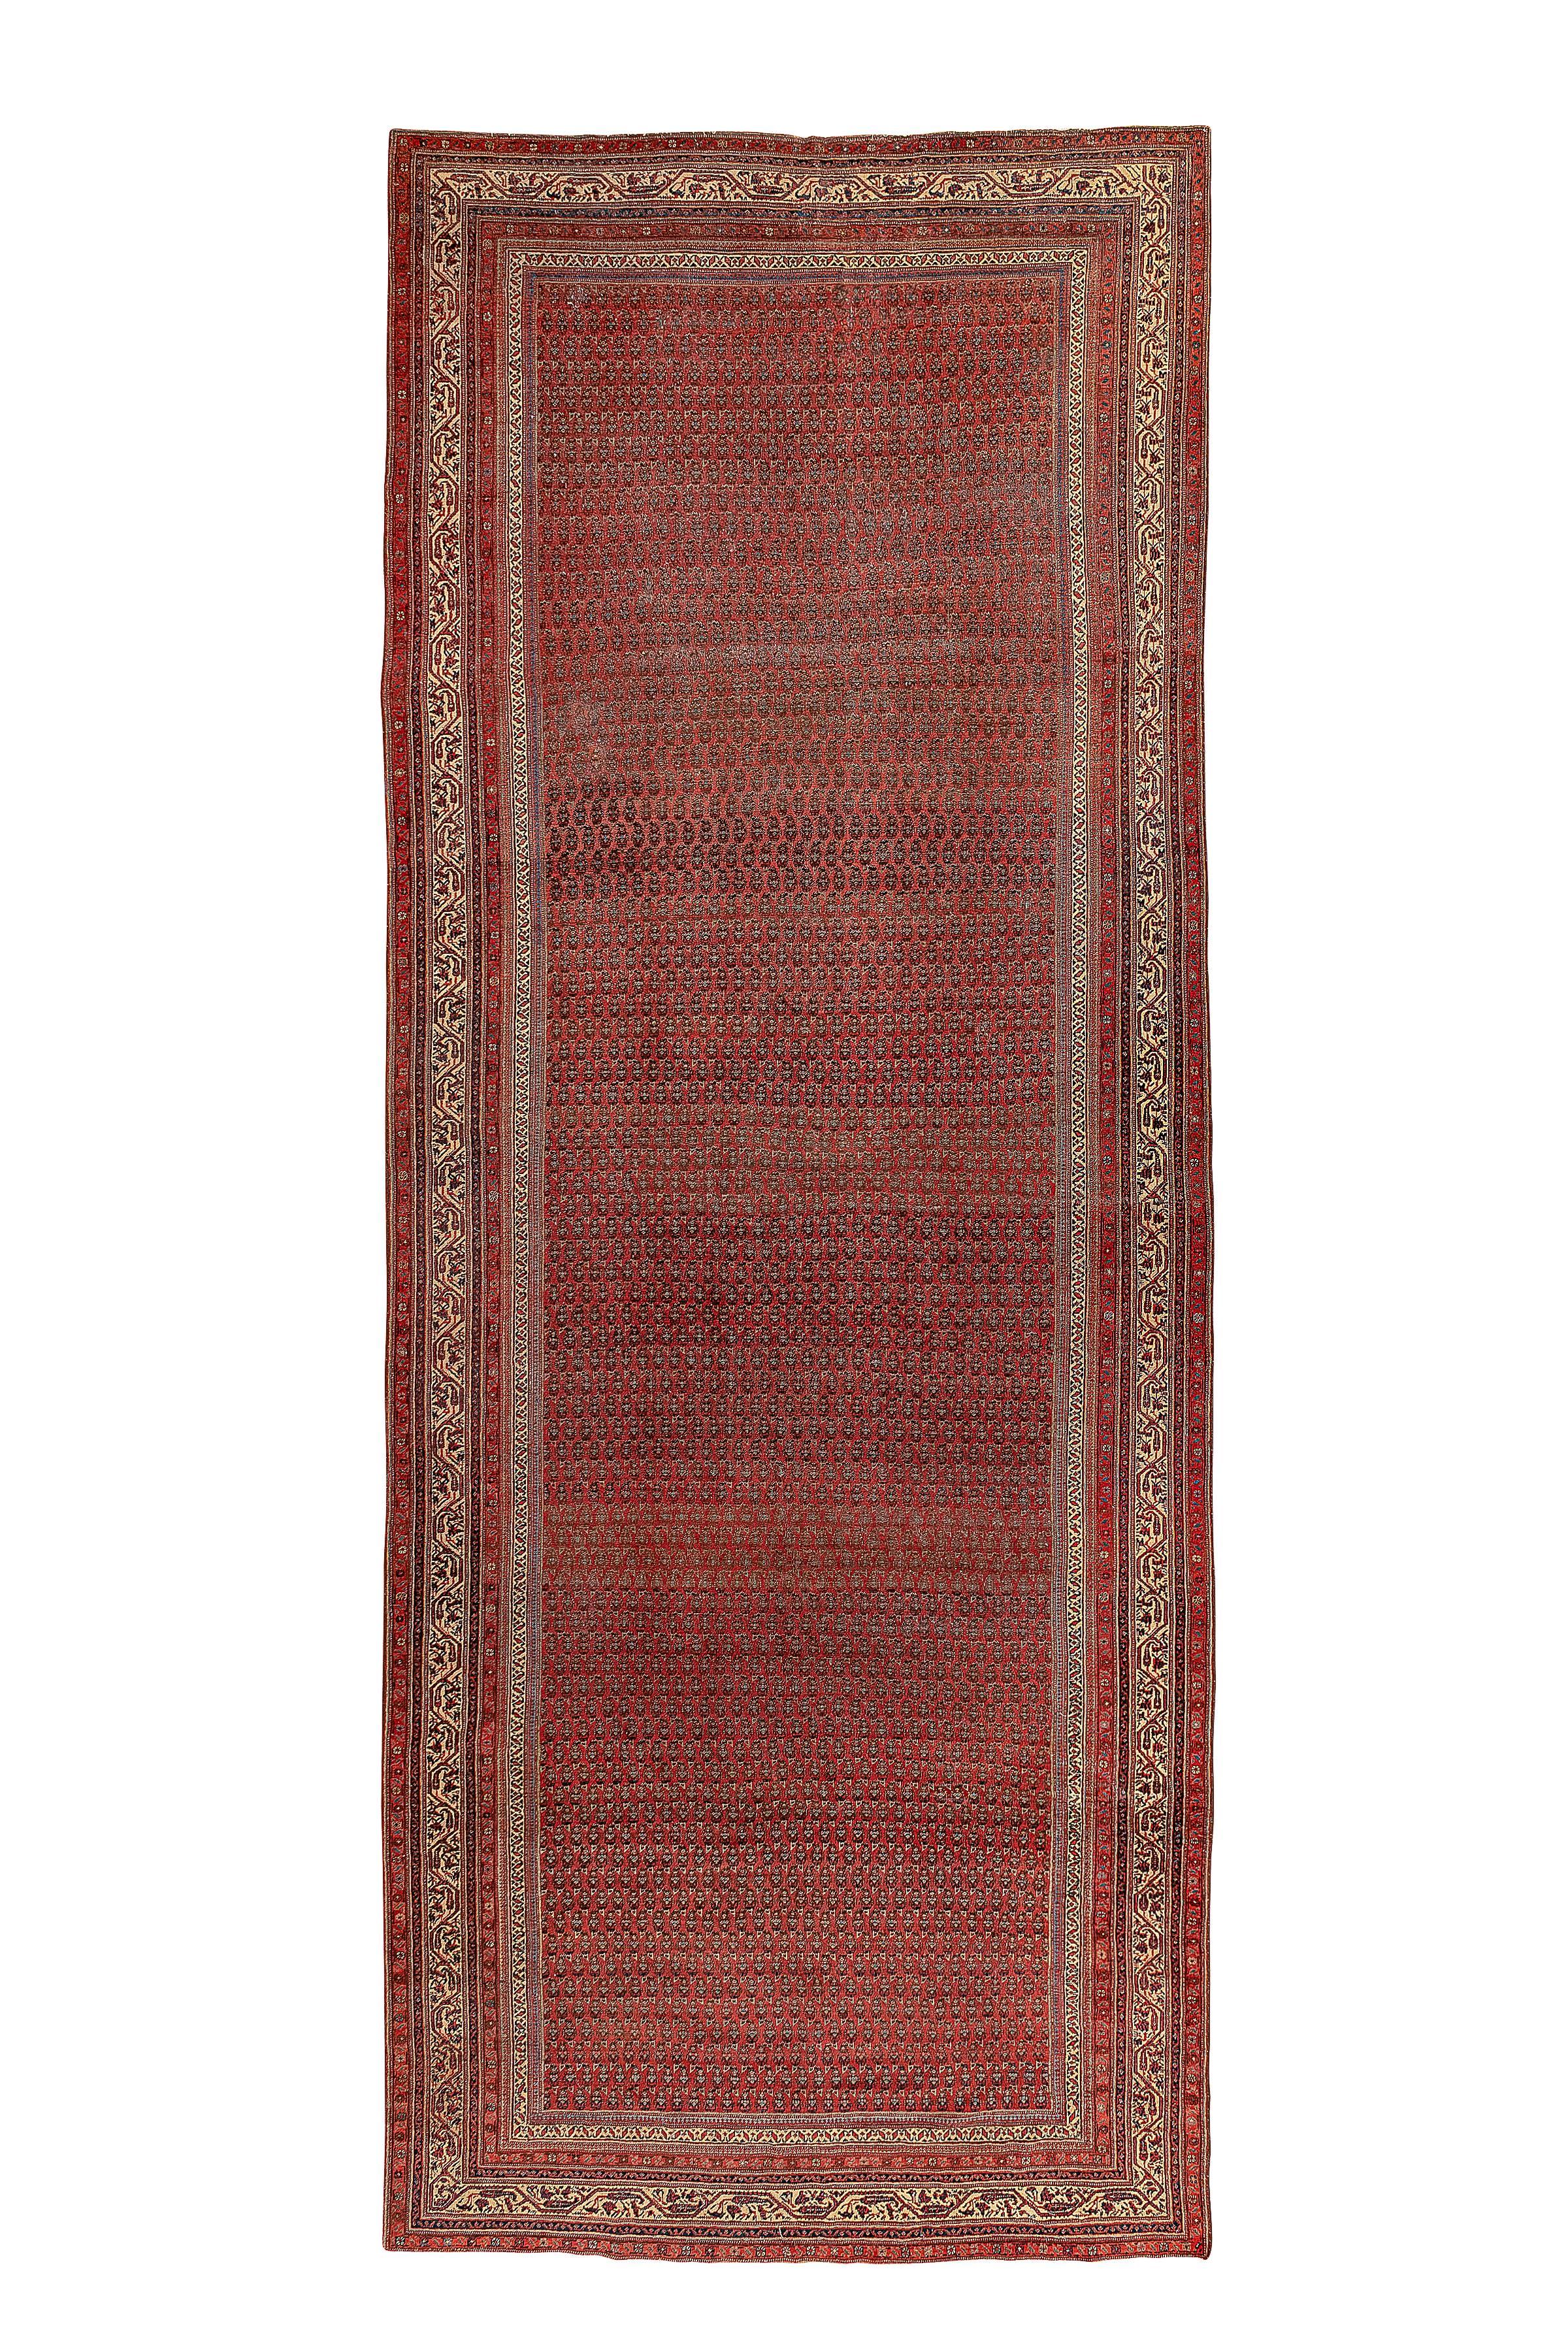 Antique Persia Seraband Rug Runner Galrery  In Good Condition For Sale In Barueri, SP, BR